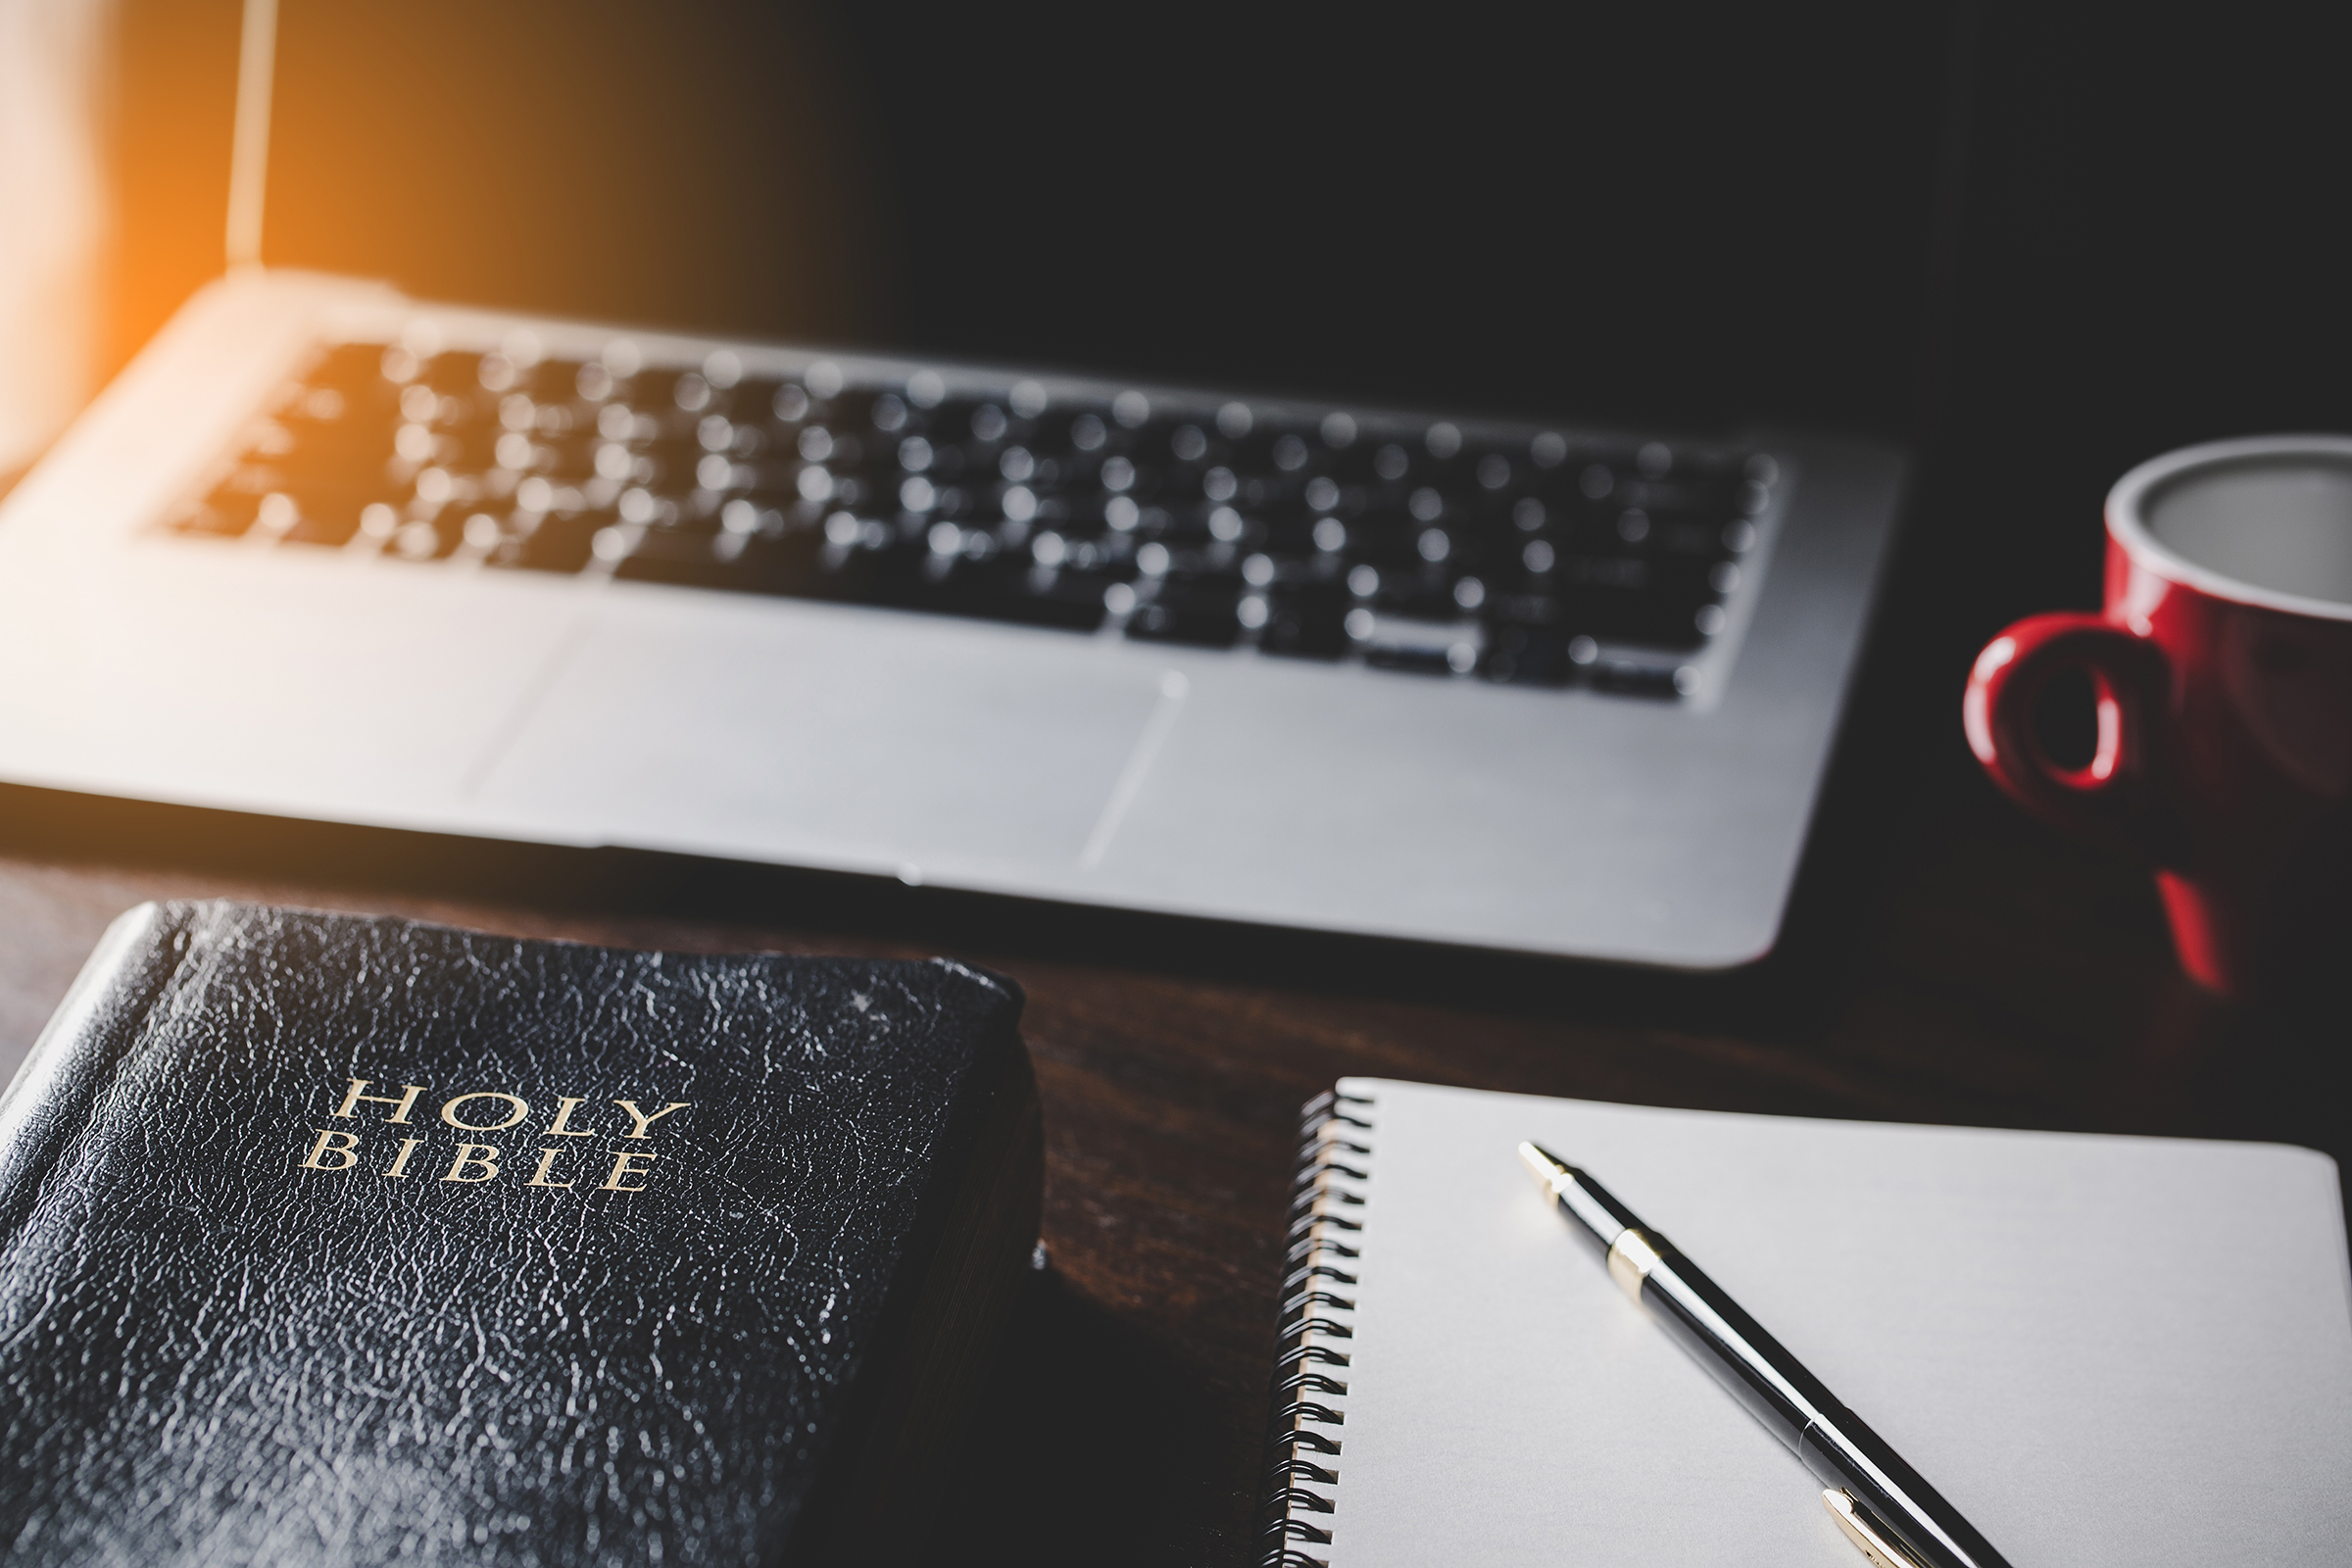 Study aid from Logos, MBCB now available for bivo pastors -